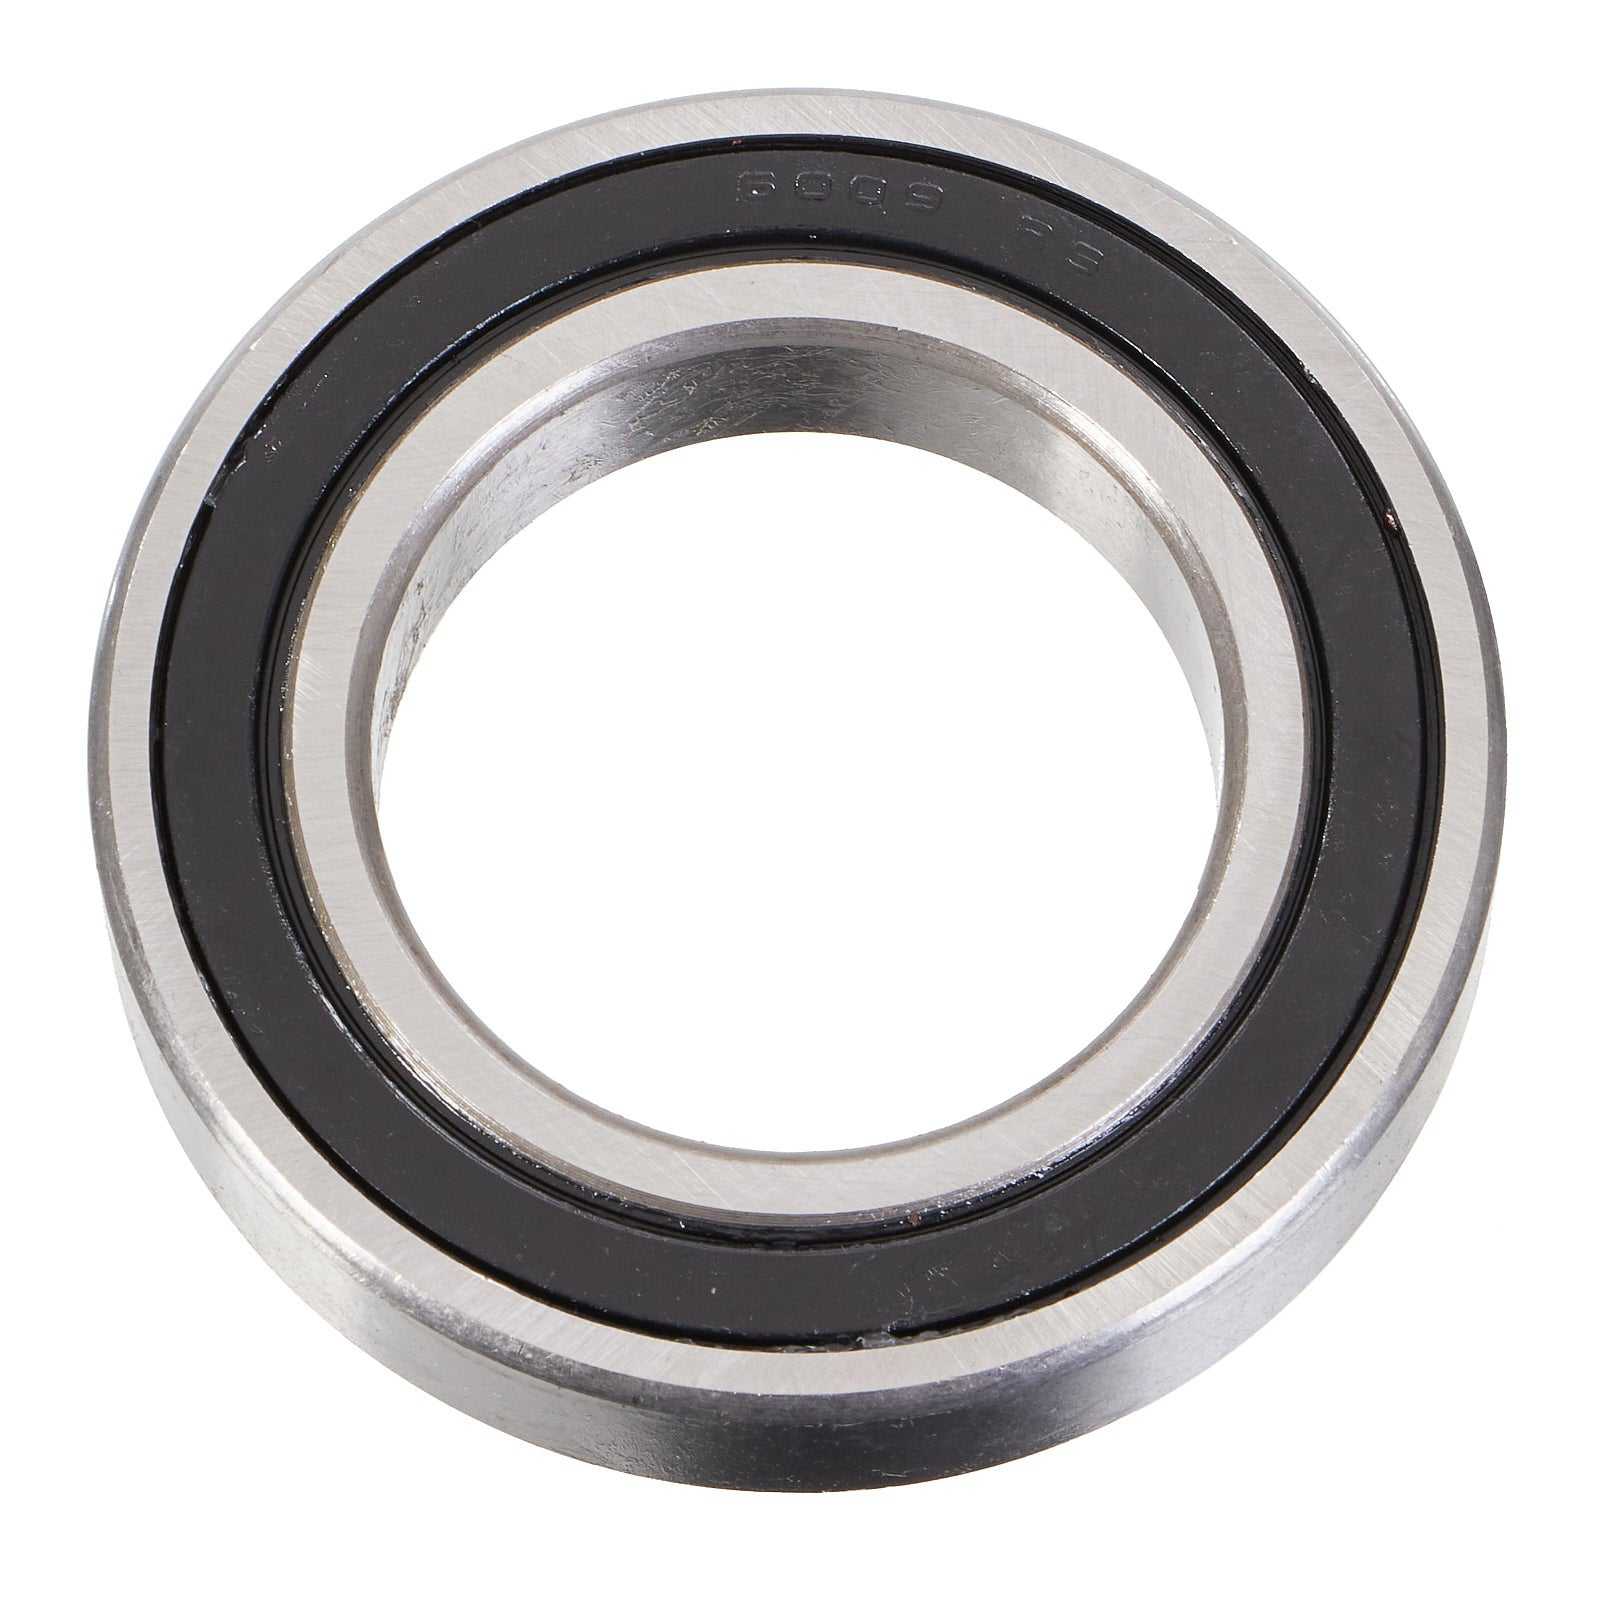 Whites Motorcycle Parts, BEARING 6009-2RS 1 PCE/EACH